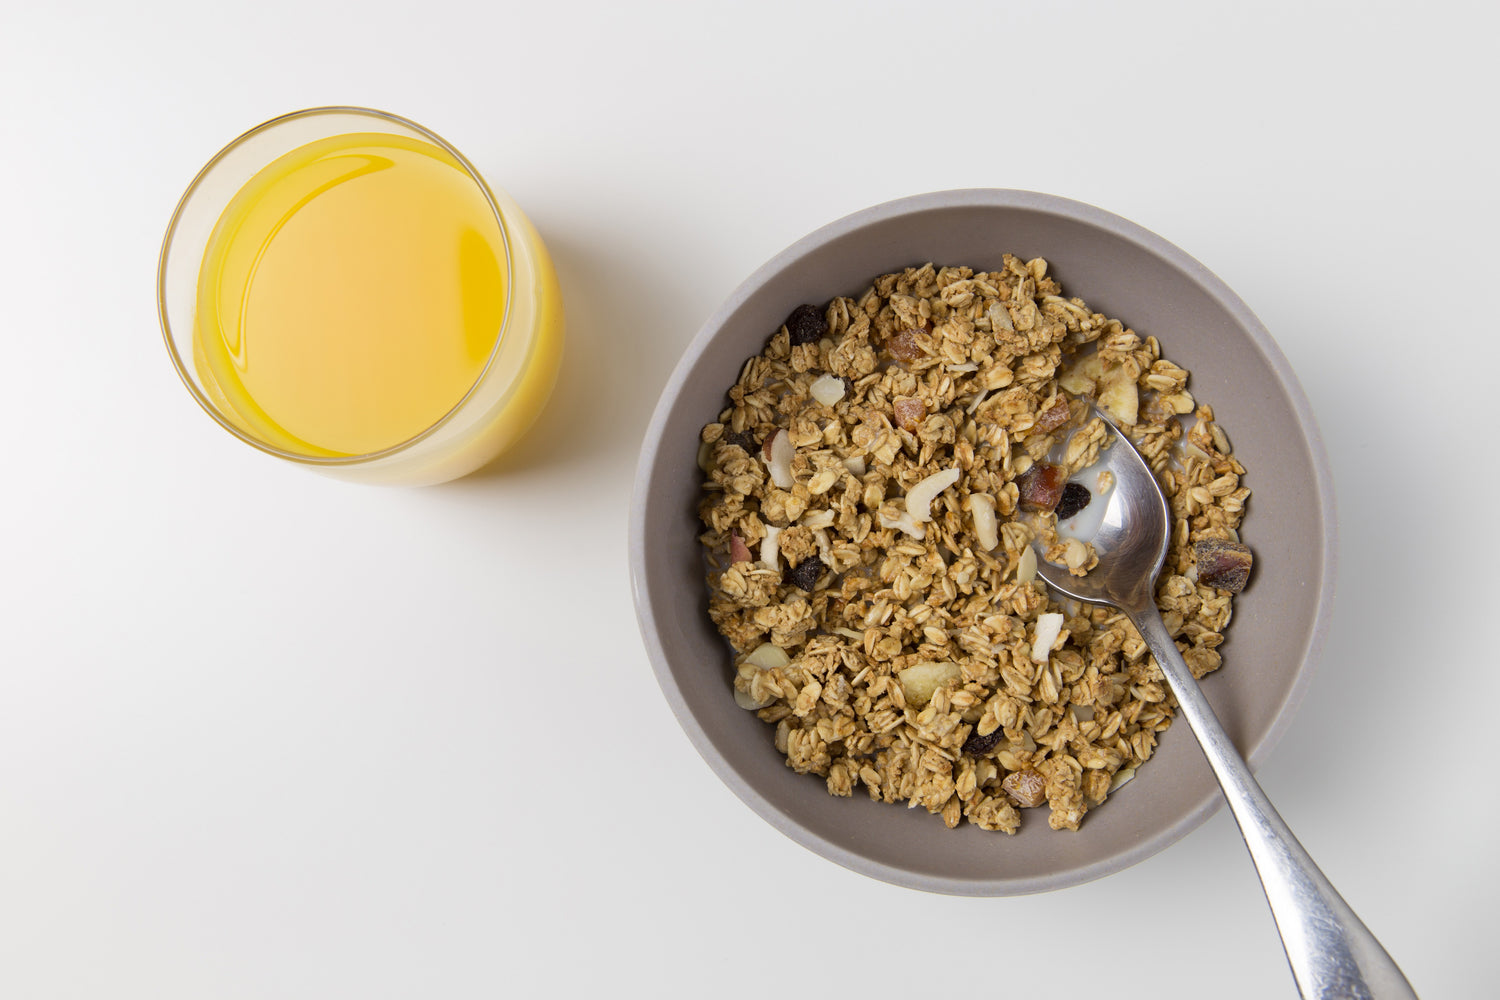 Morning oatmeal served with a site of orange juice.